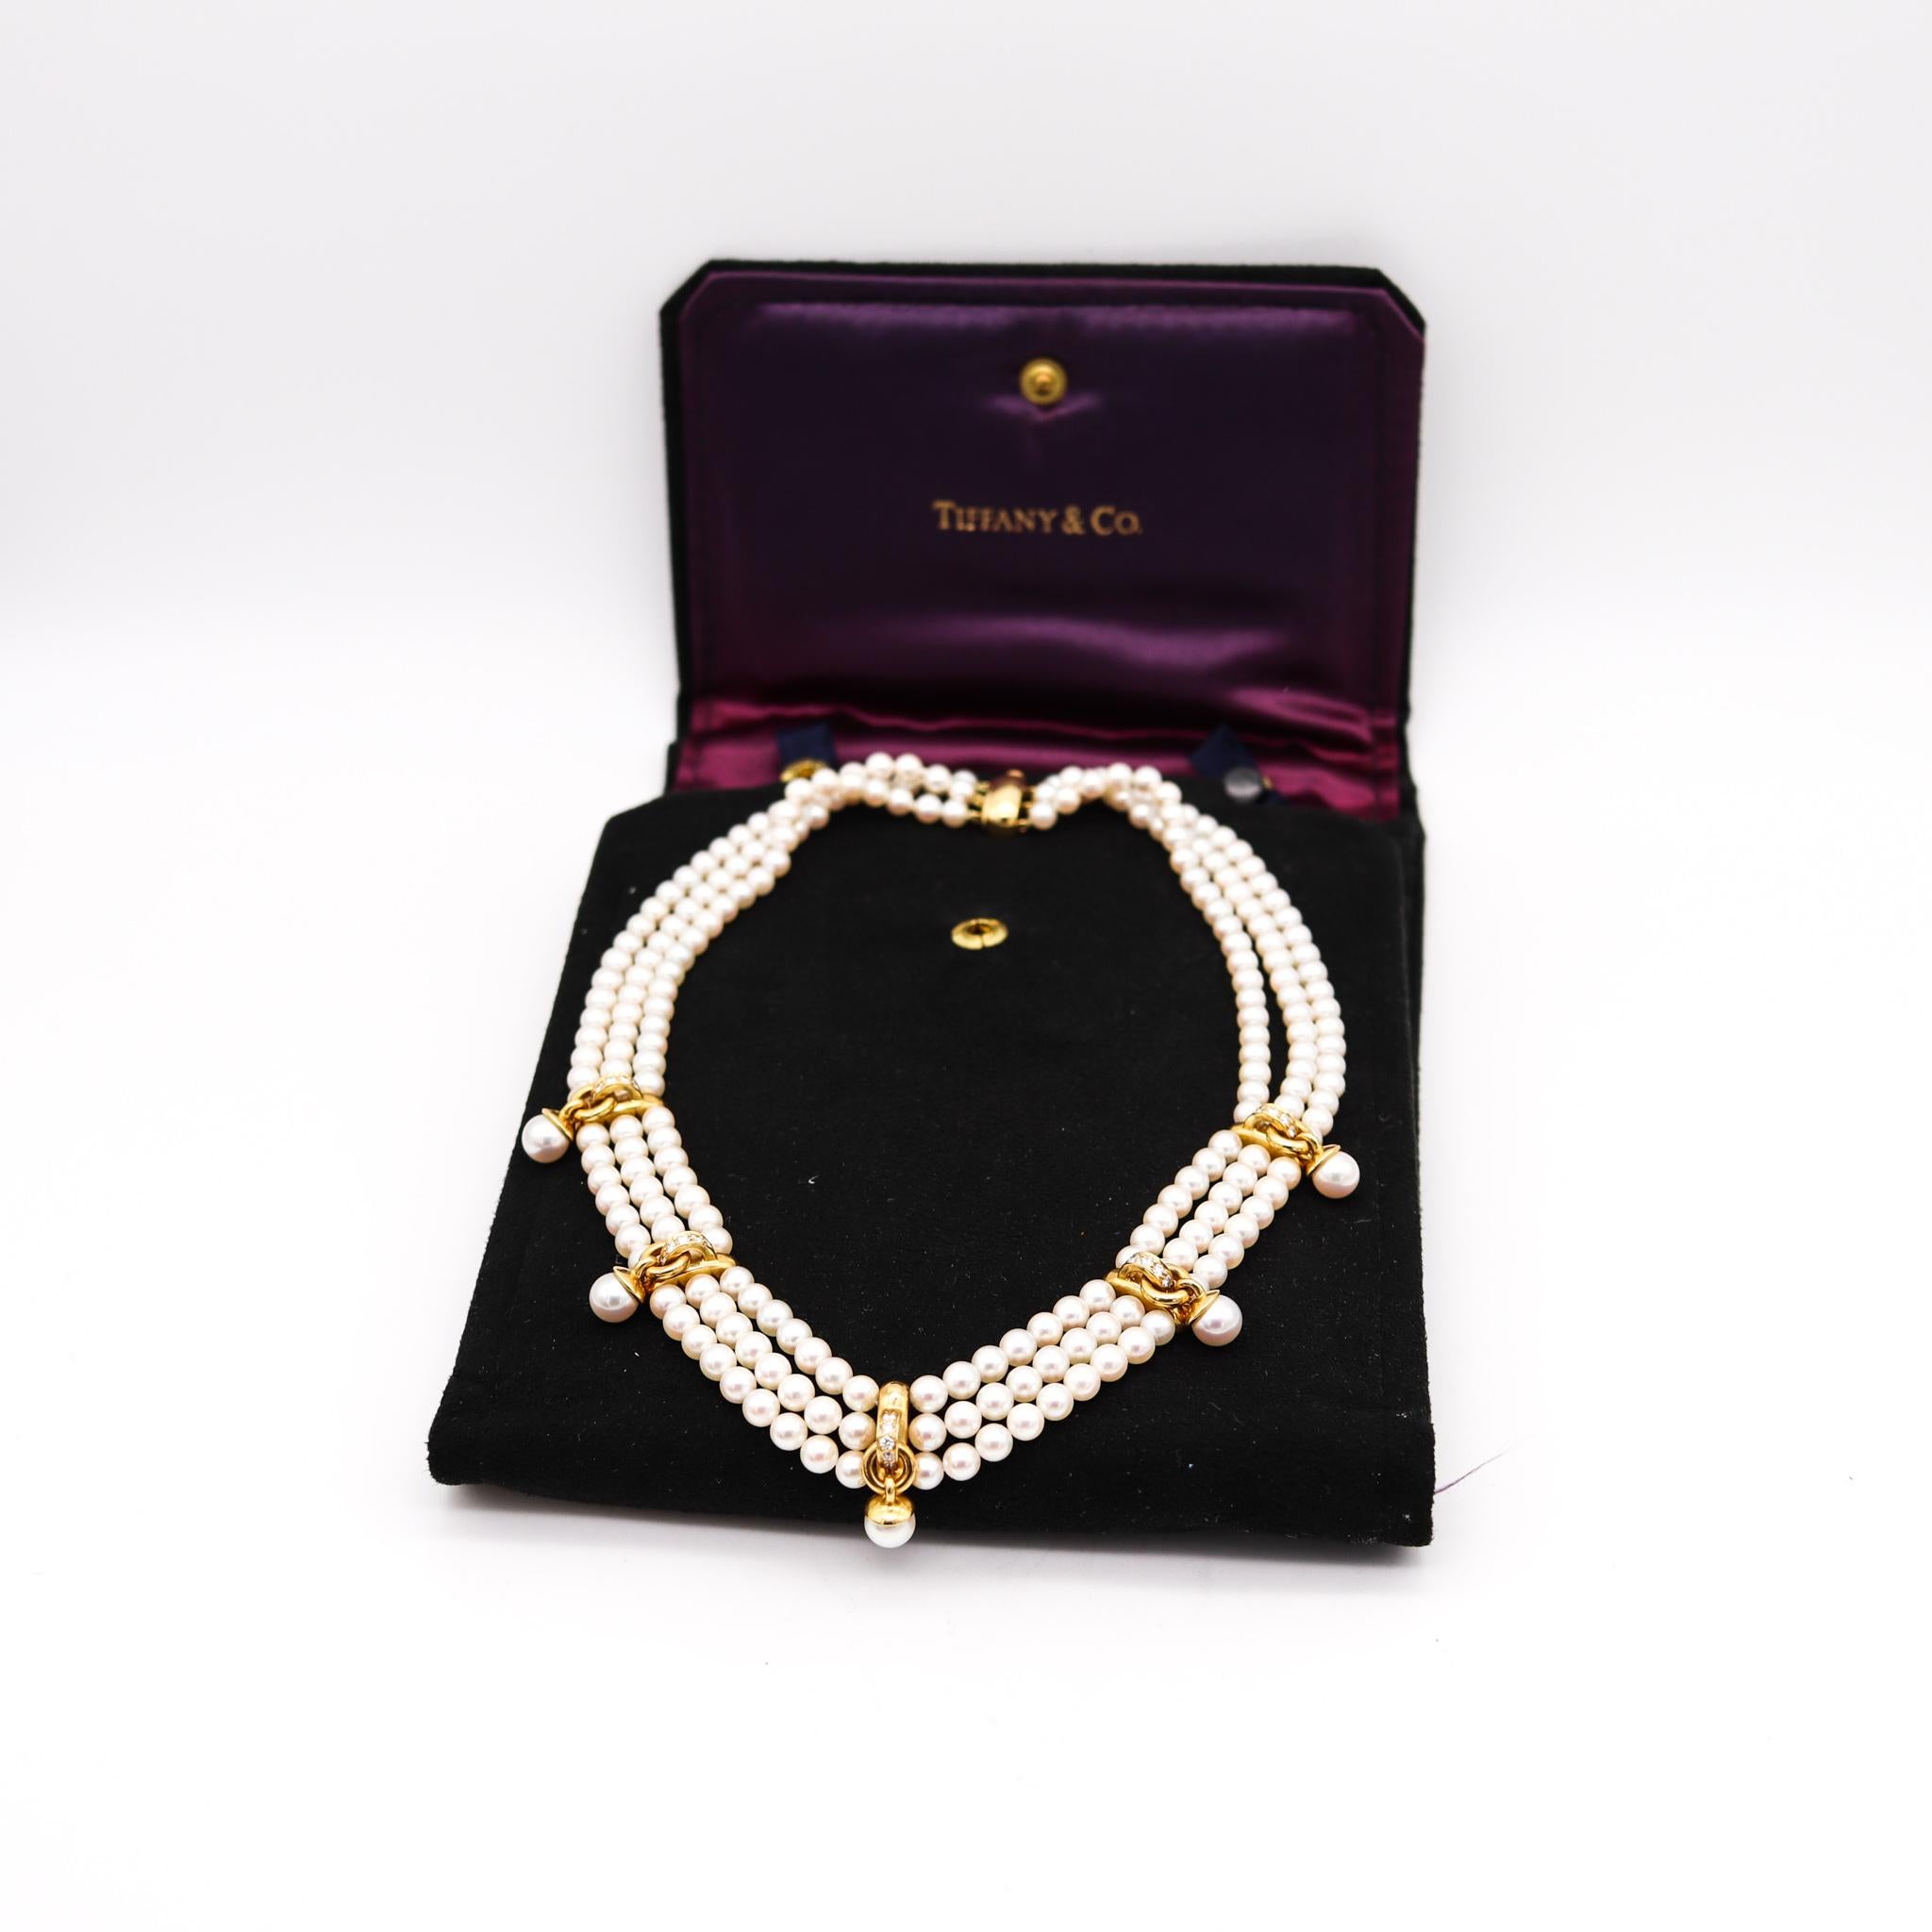 Pearls necklace designed by Tiffany & Co.

Exceptional classic necklace, created in New York city at the Tiffany Studios, back in the late 20th century, This necklace is composed by three rows of pearls of 5 mm mounted with five dividers crafted in